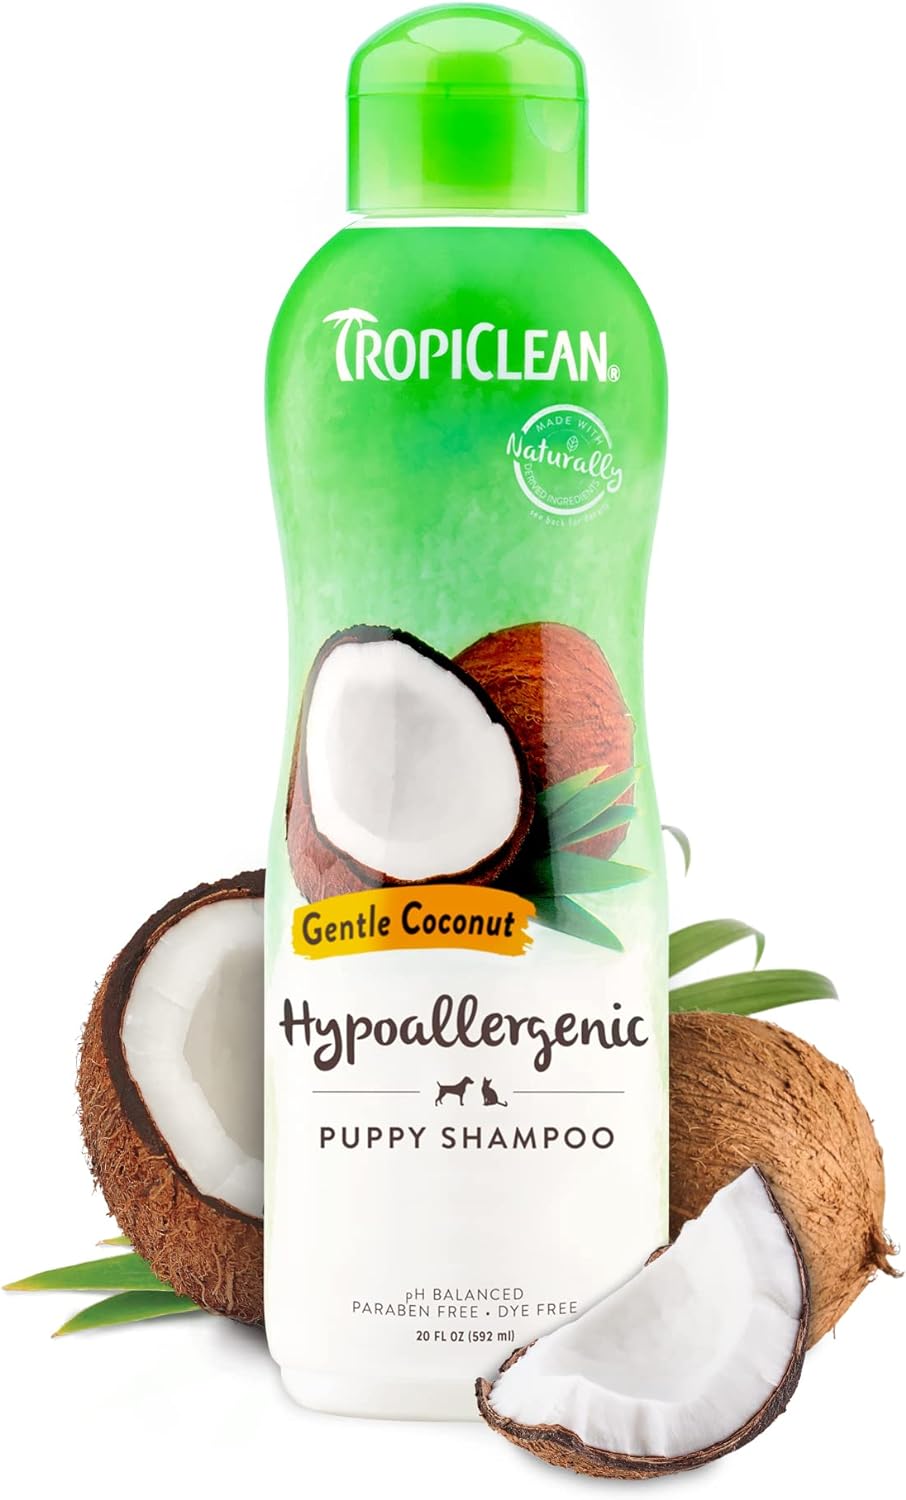 TropiClean Dog Shampoo Grooming Supplies - Hypoallergenic Puppy & Kitten Shampoo Gentle Cleansing for Sensitive Skin - Derived from Natural Ingredients - Used by Groomers - Gentle Coconut, 592ml?TRGNSH20Z